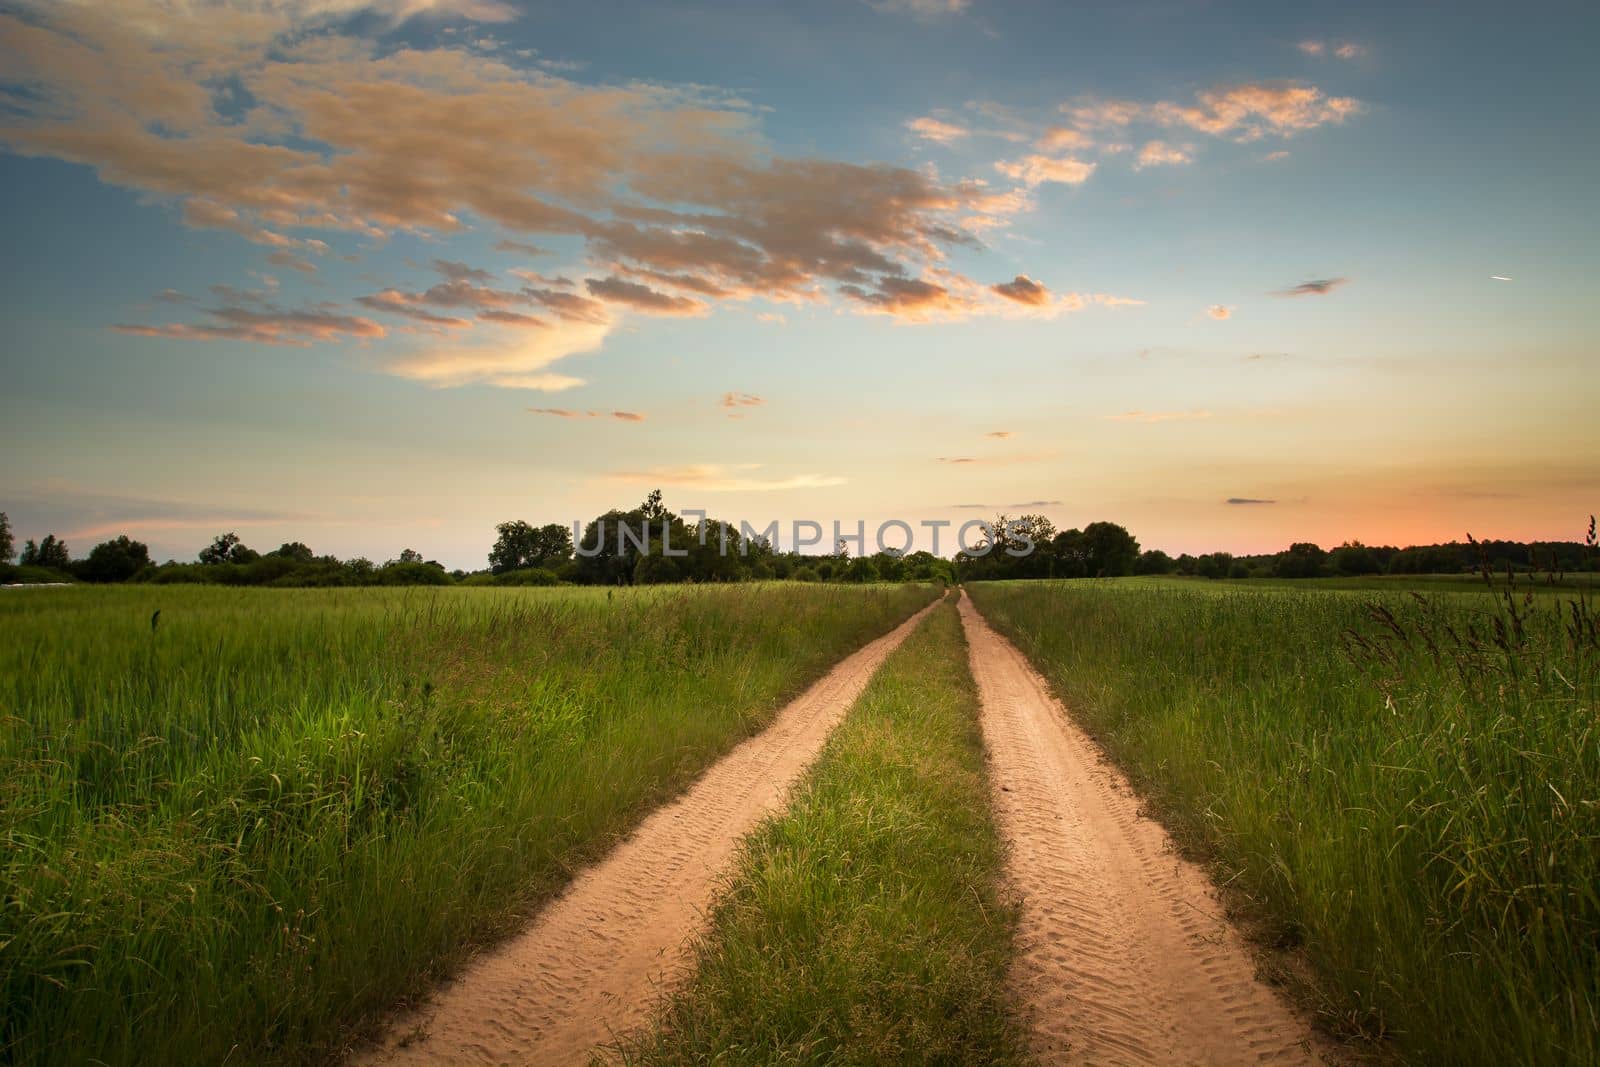 Sandy road through fields and cloud on the evening sky by darekb22